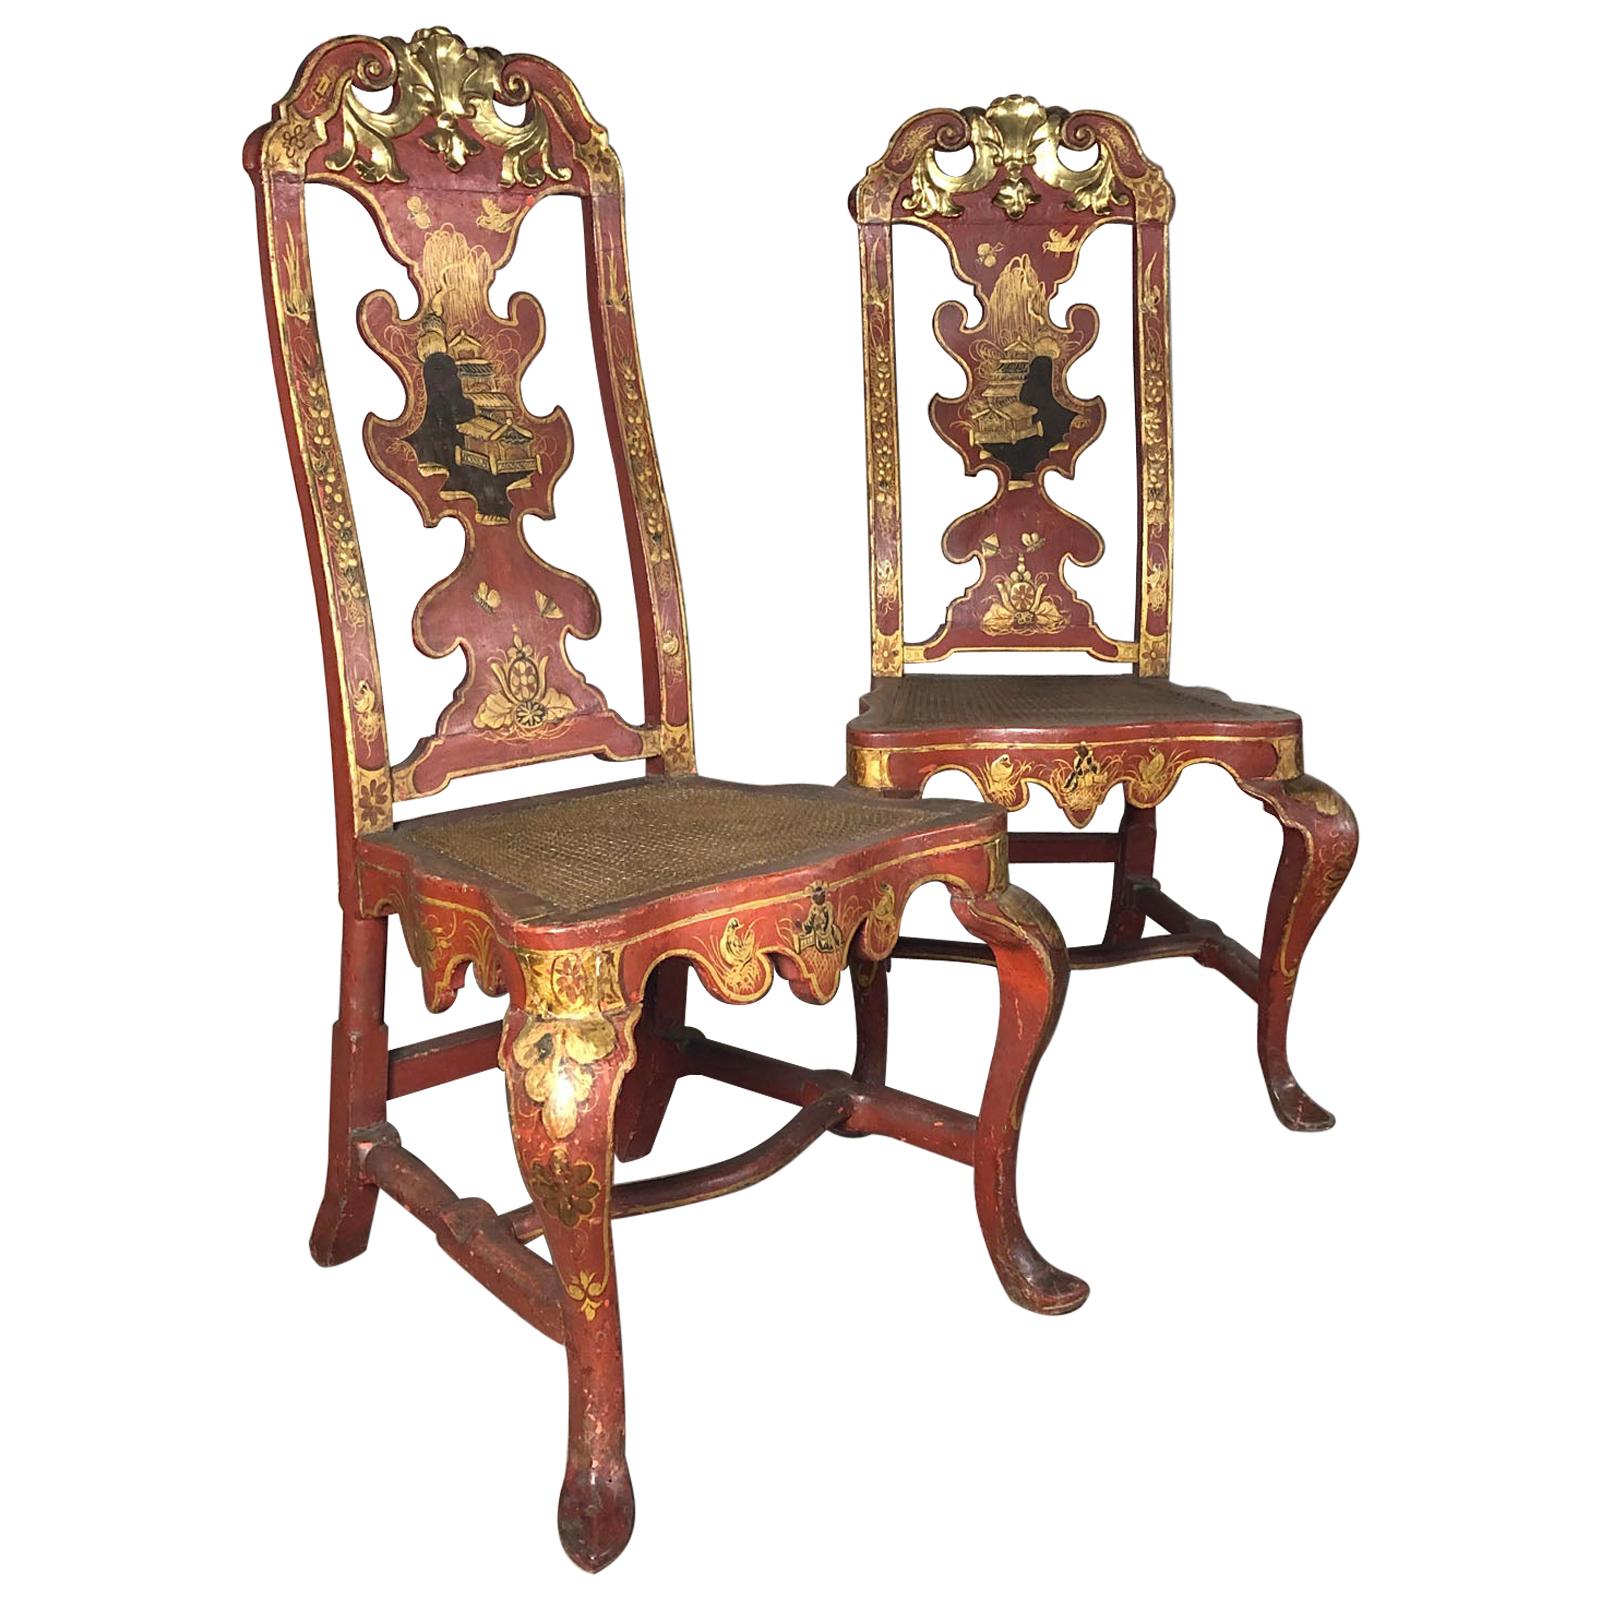 Pair of Spanish Early 18th Century Red Lacquer Chairs in the English Taste For Sale